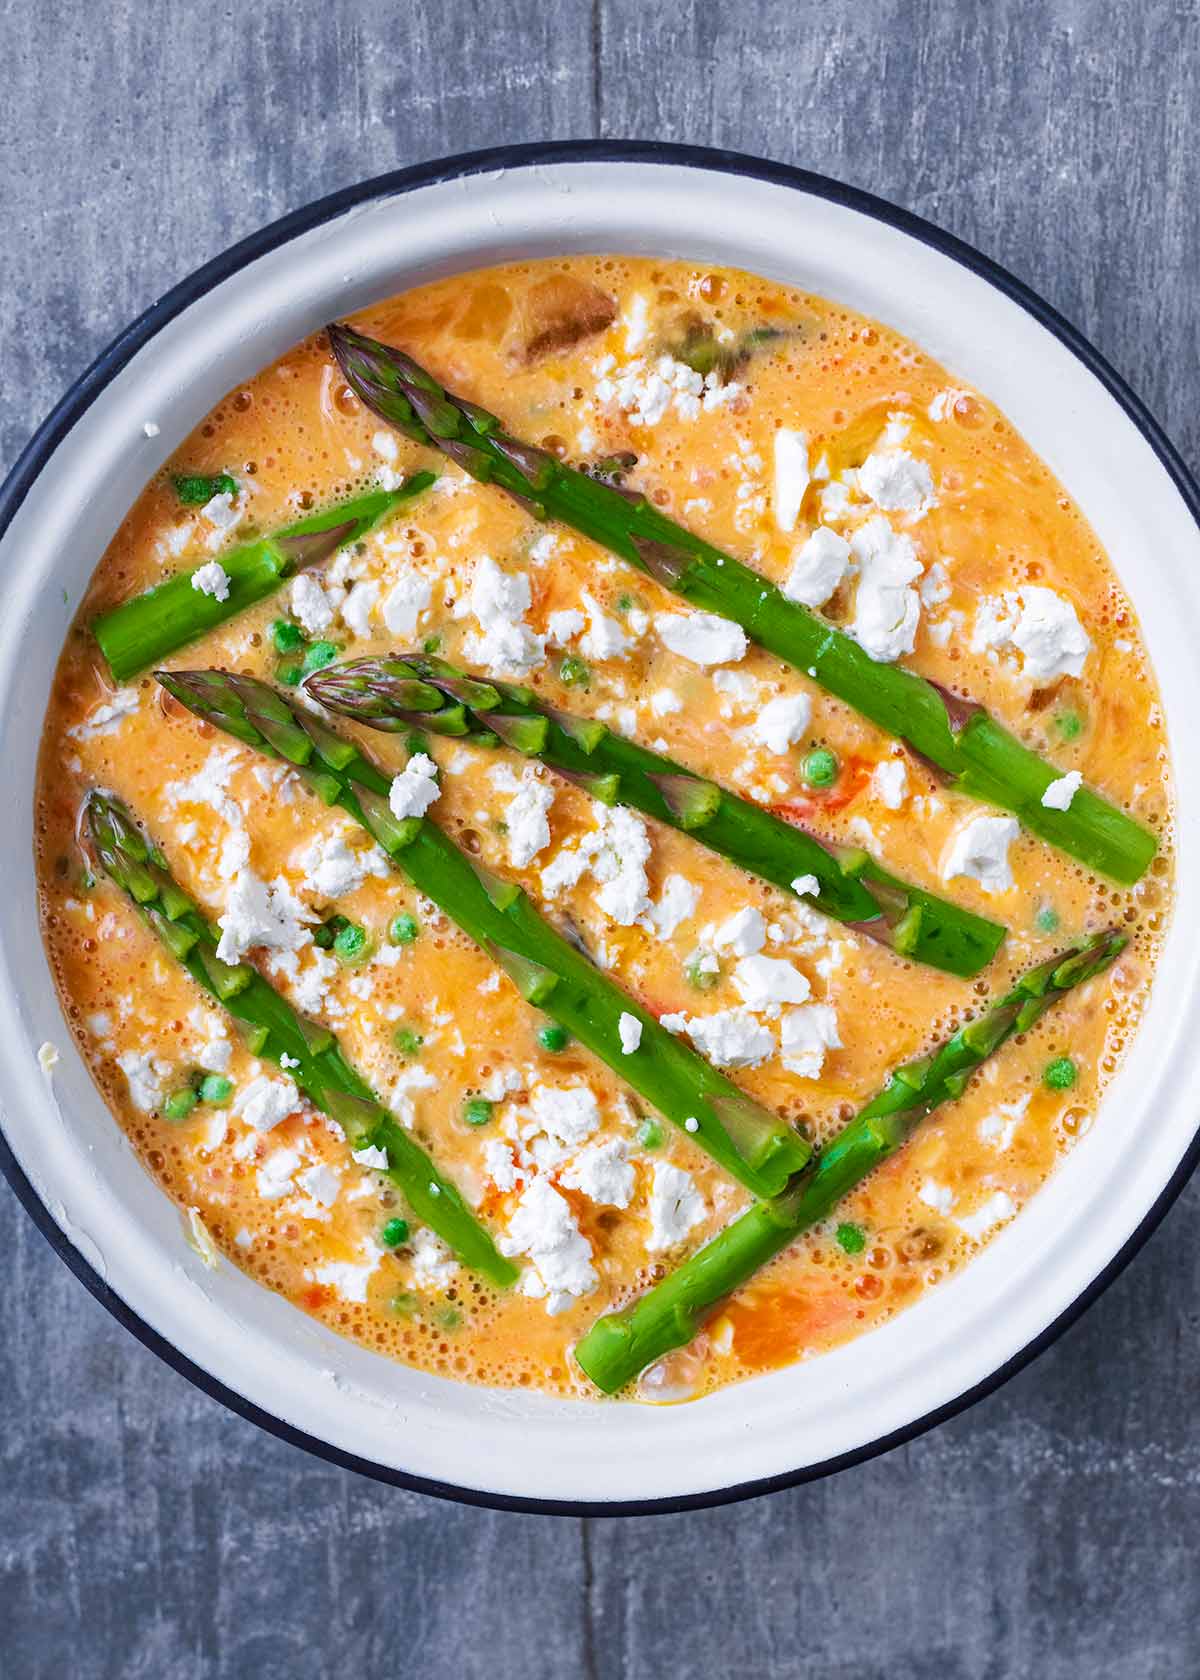 A baking dish containing whisked egg, asparagus spears, peas and crumbled feta.